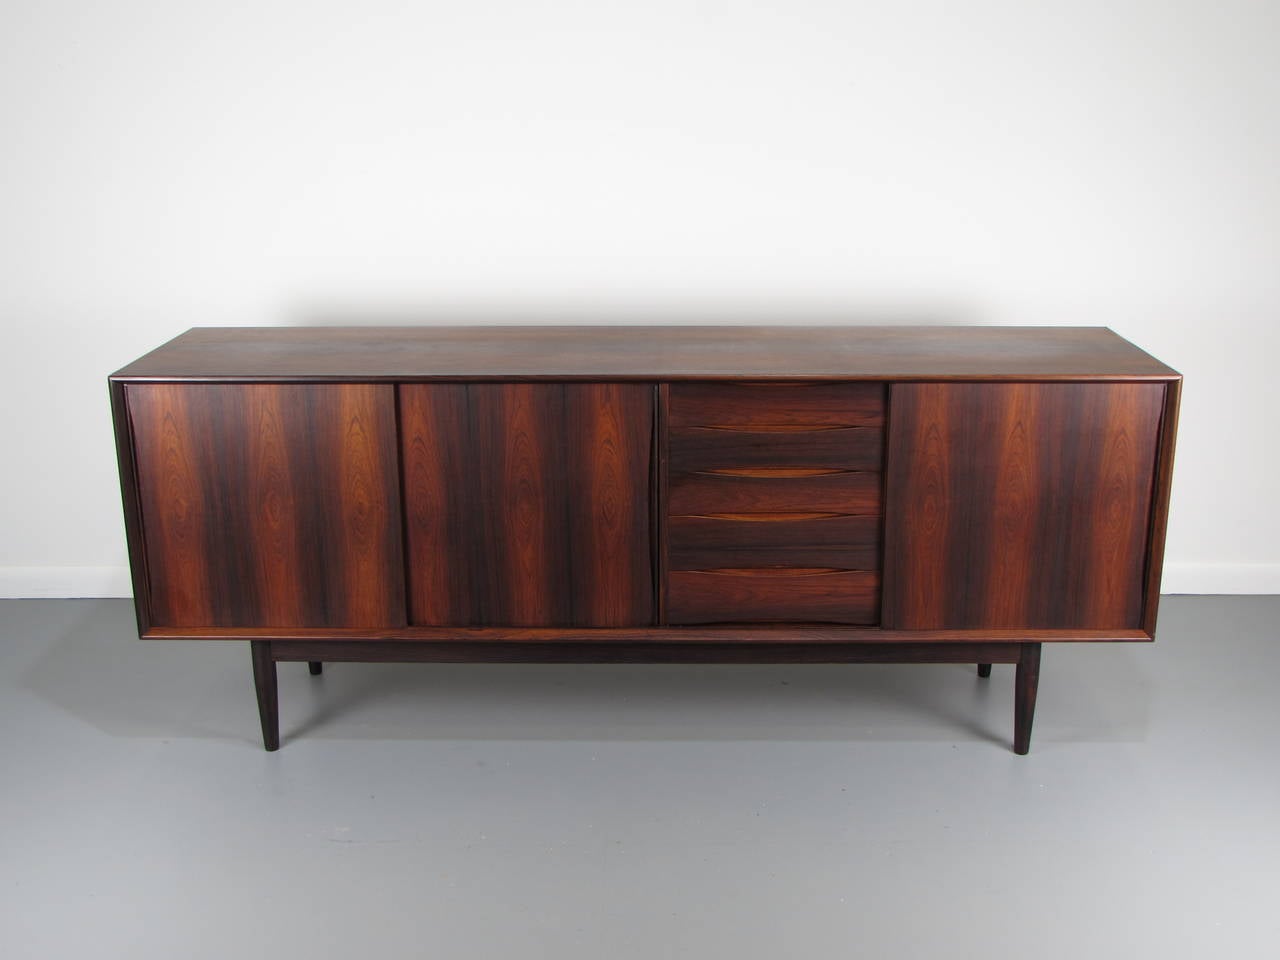 Exceptional Danish modern rosewood buffet with sliding doors, 1960s.

See this item in our private NYC showroom! Refine Limited is located in the heart of Chelsea at the history Starrett-LeHigh Building, 601 West 26th Street, Suite M258. Please